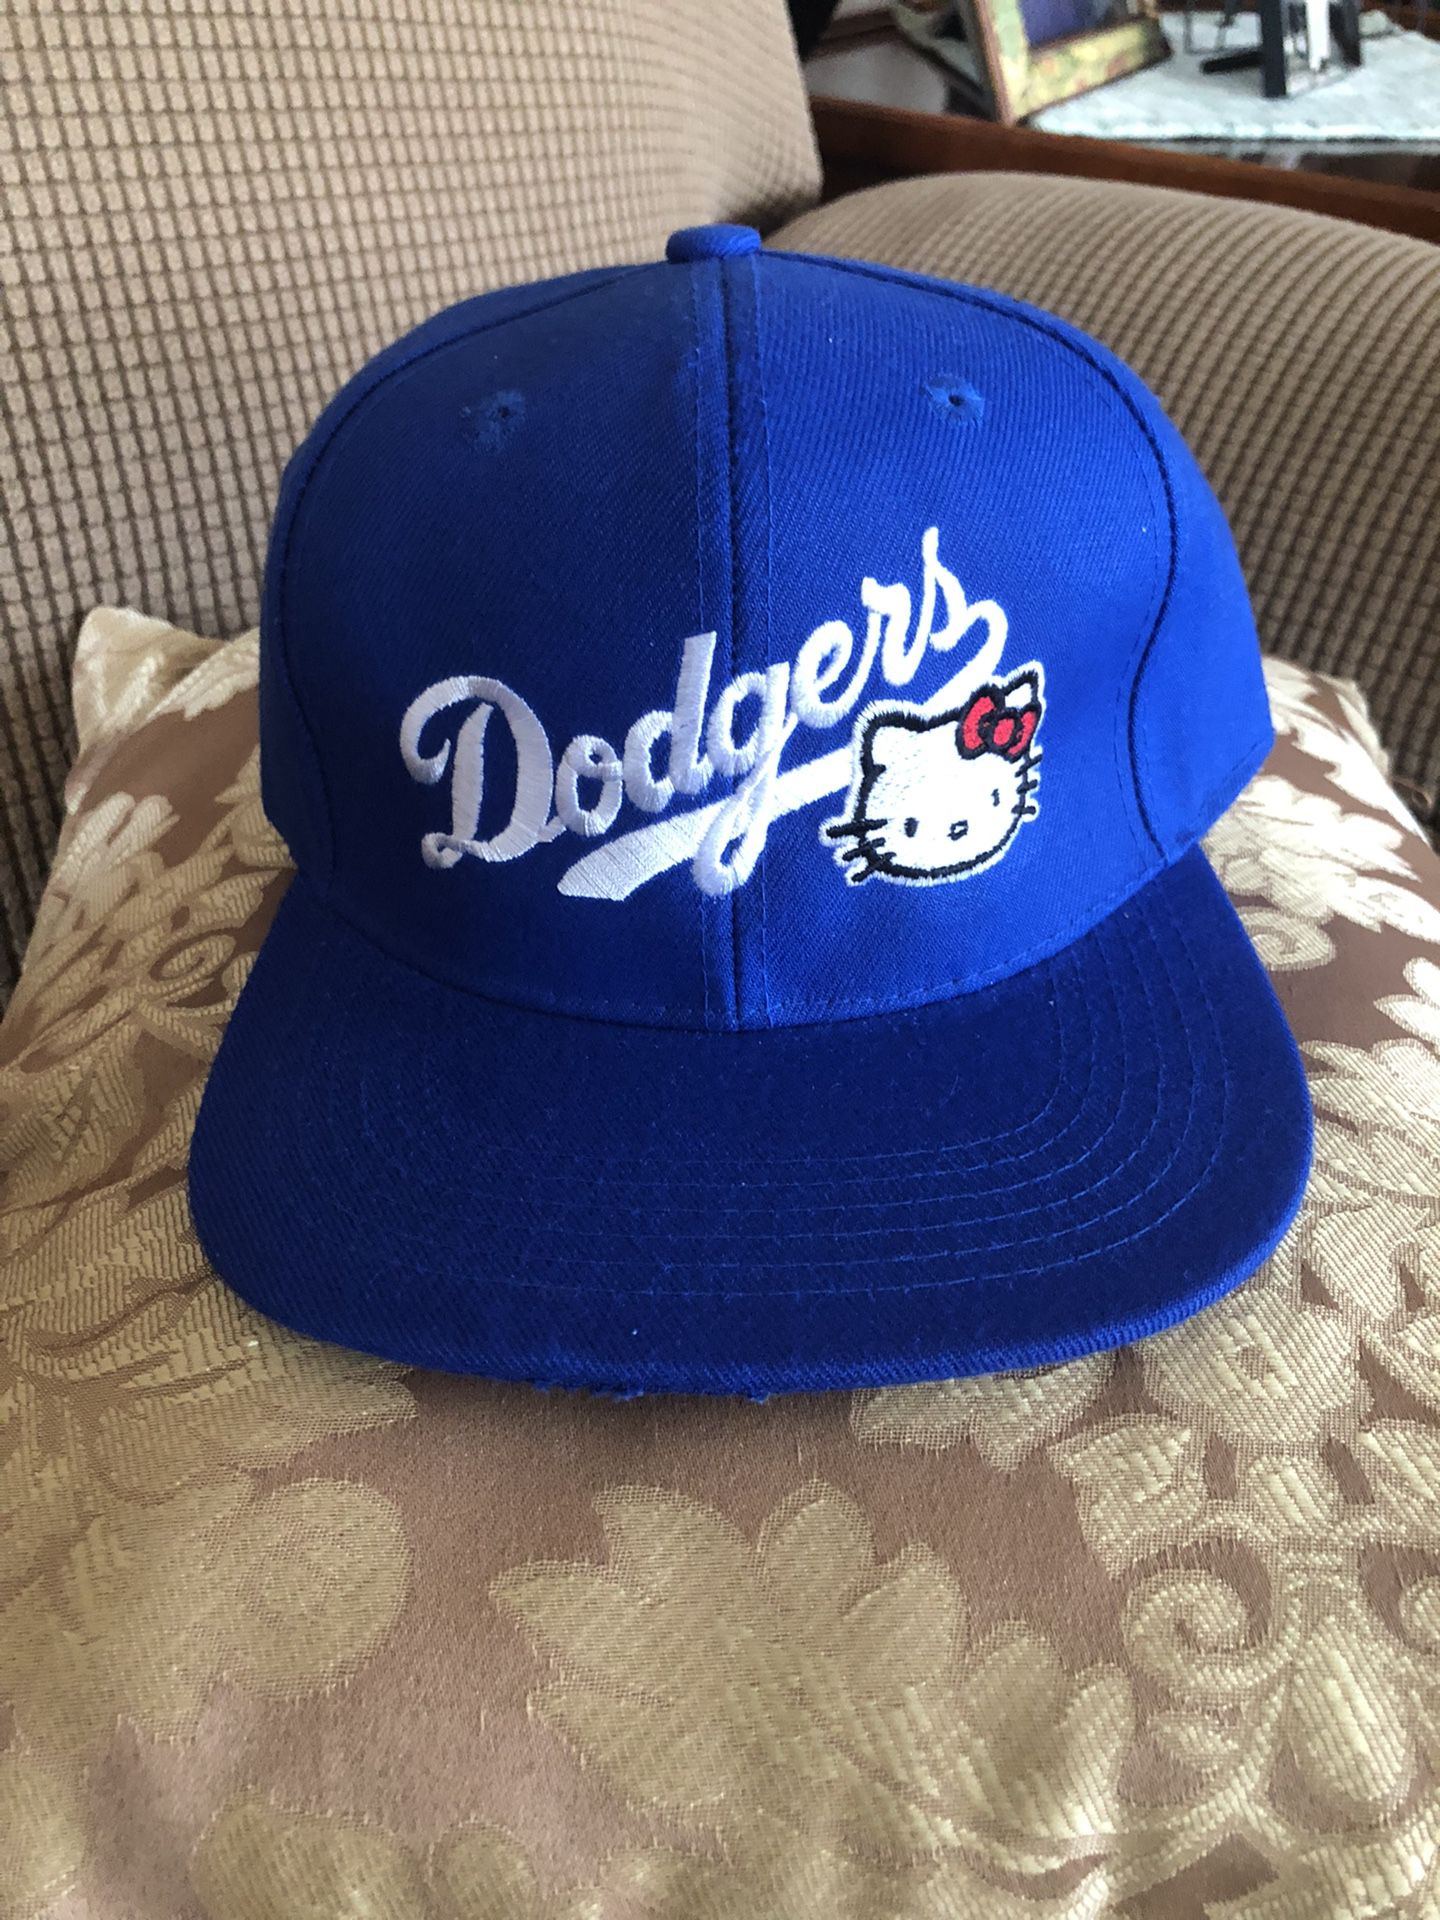 Branding to the Extreme - Hello Kitty to be Brand Advertiser on Dodger  Uniforms!